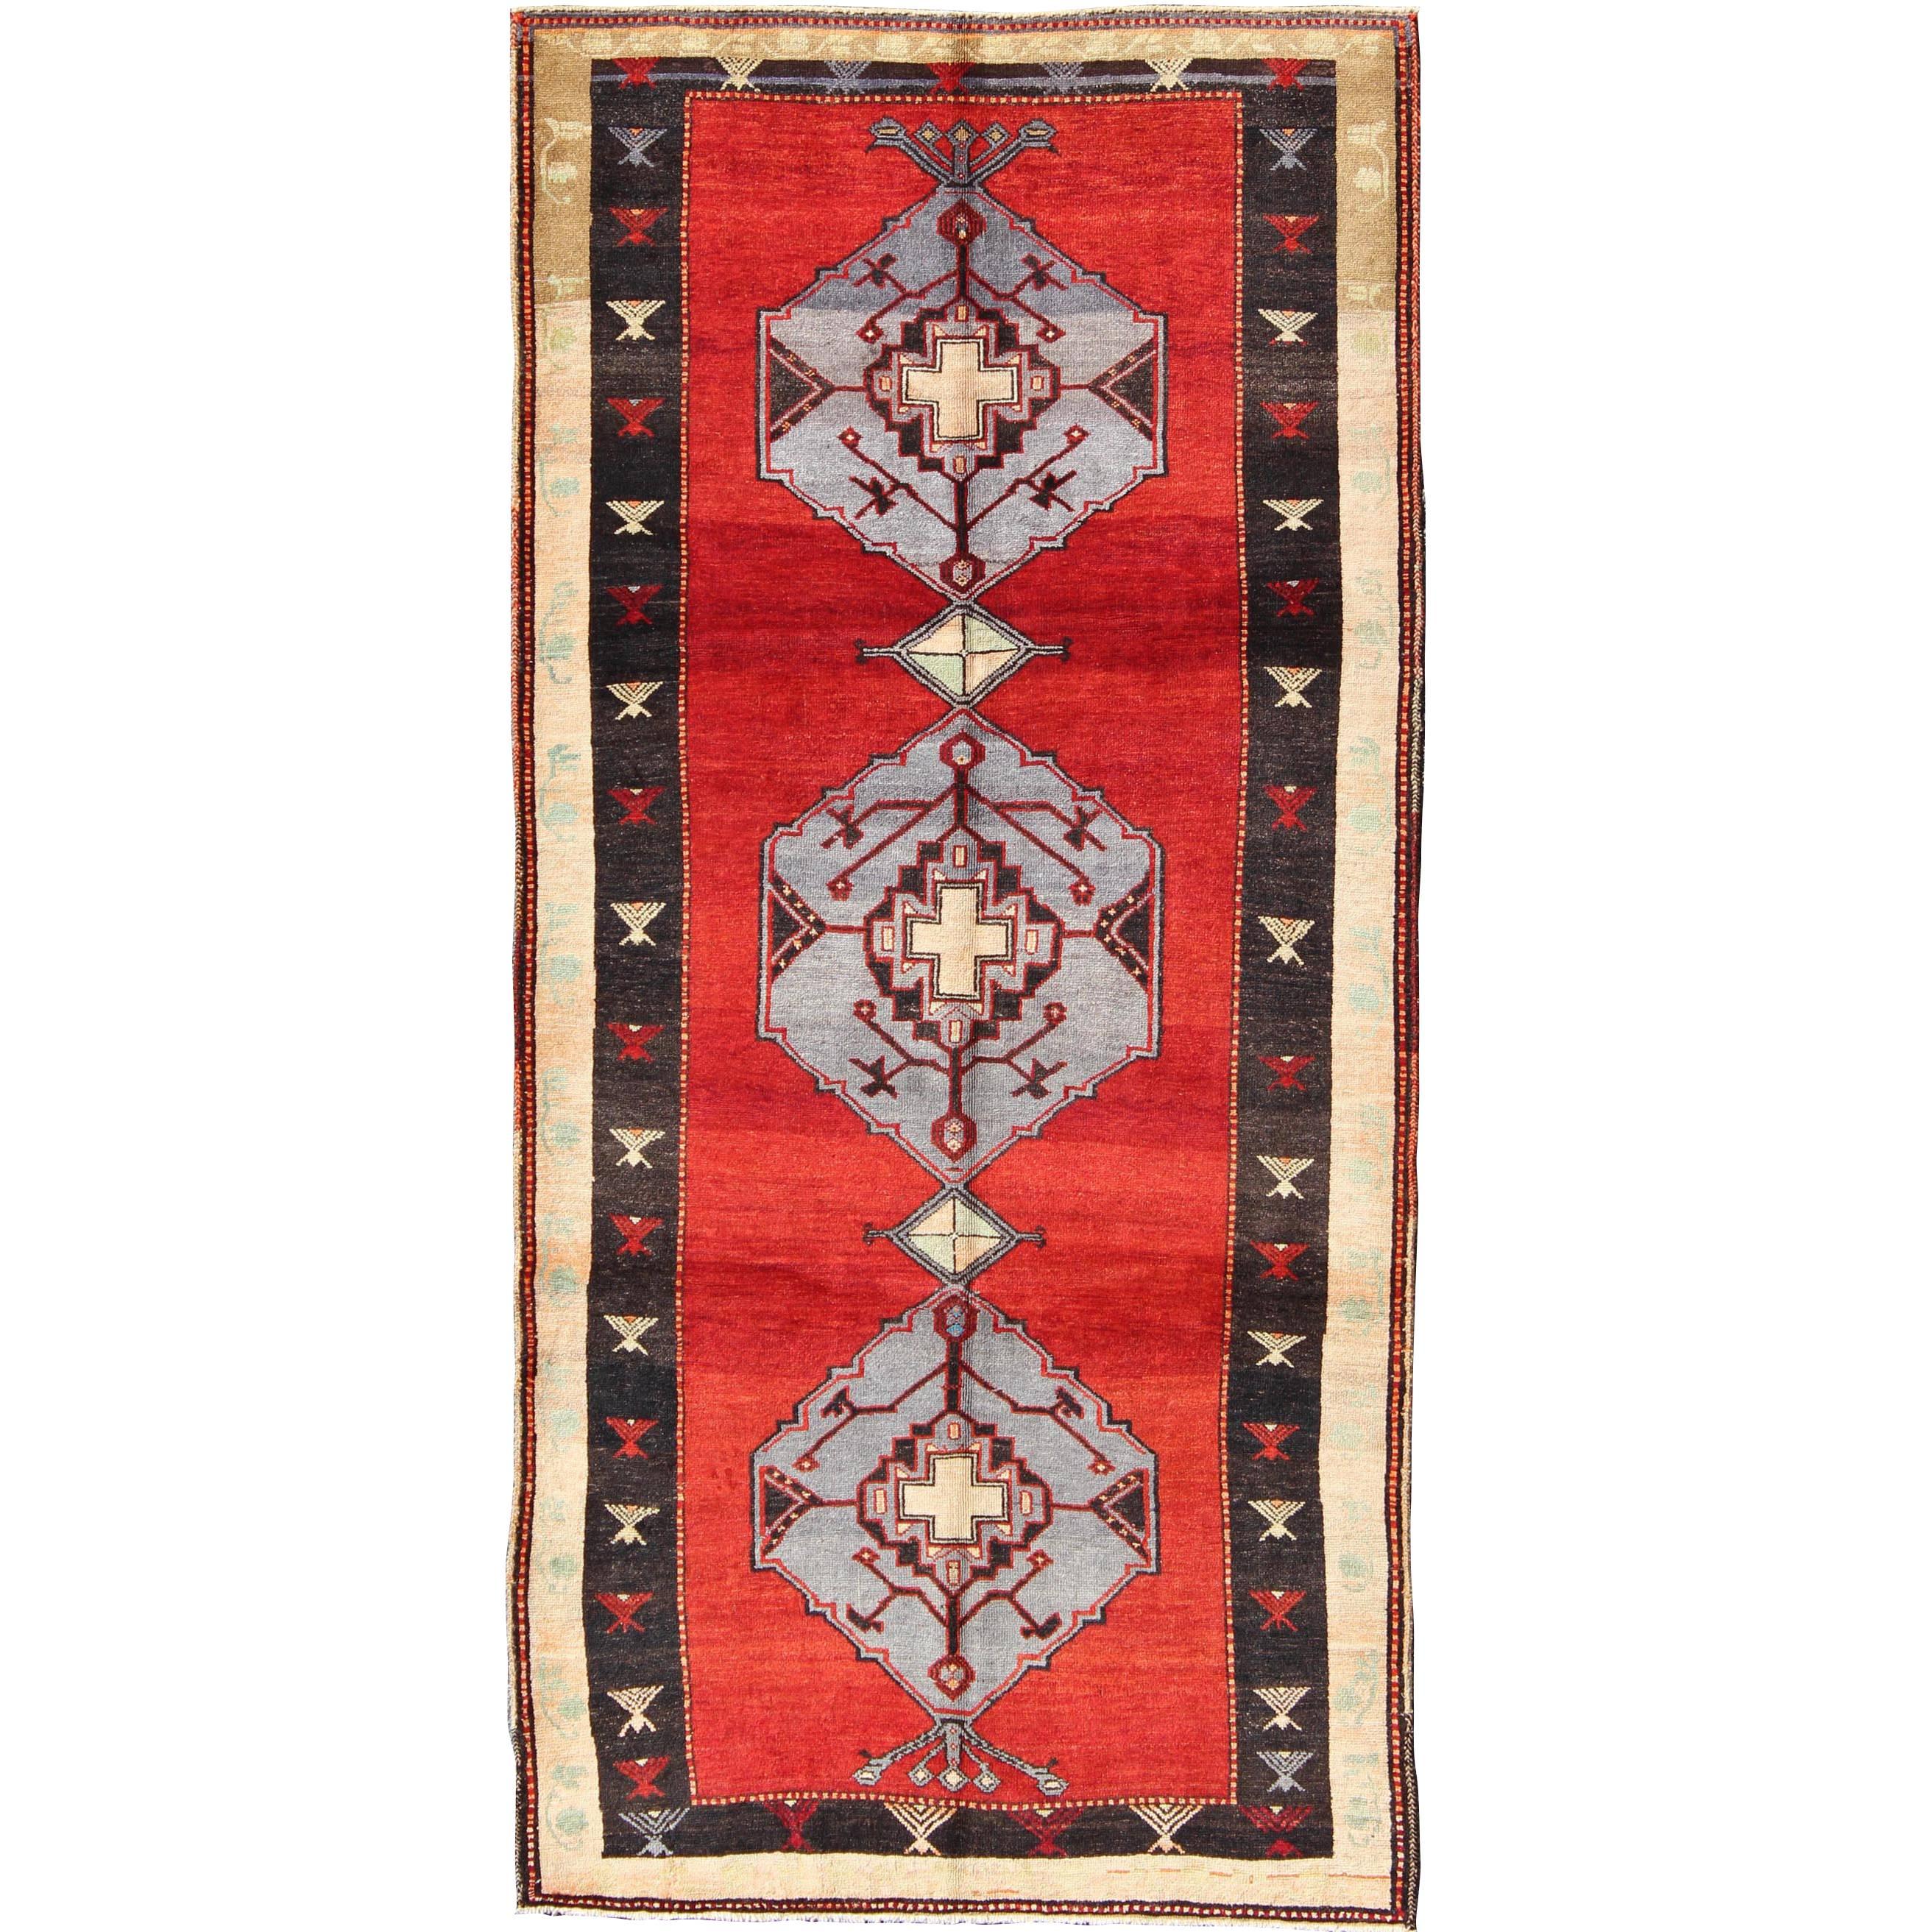 Vintage Turkish Rug With Multi-Layered Diamond Medallions in Beautiful Red